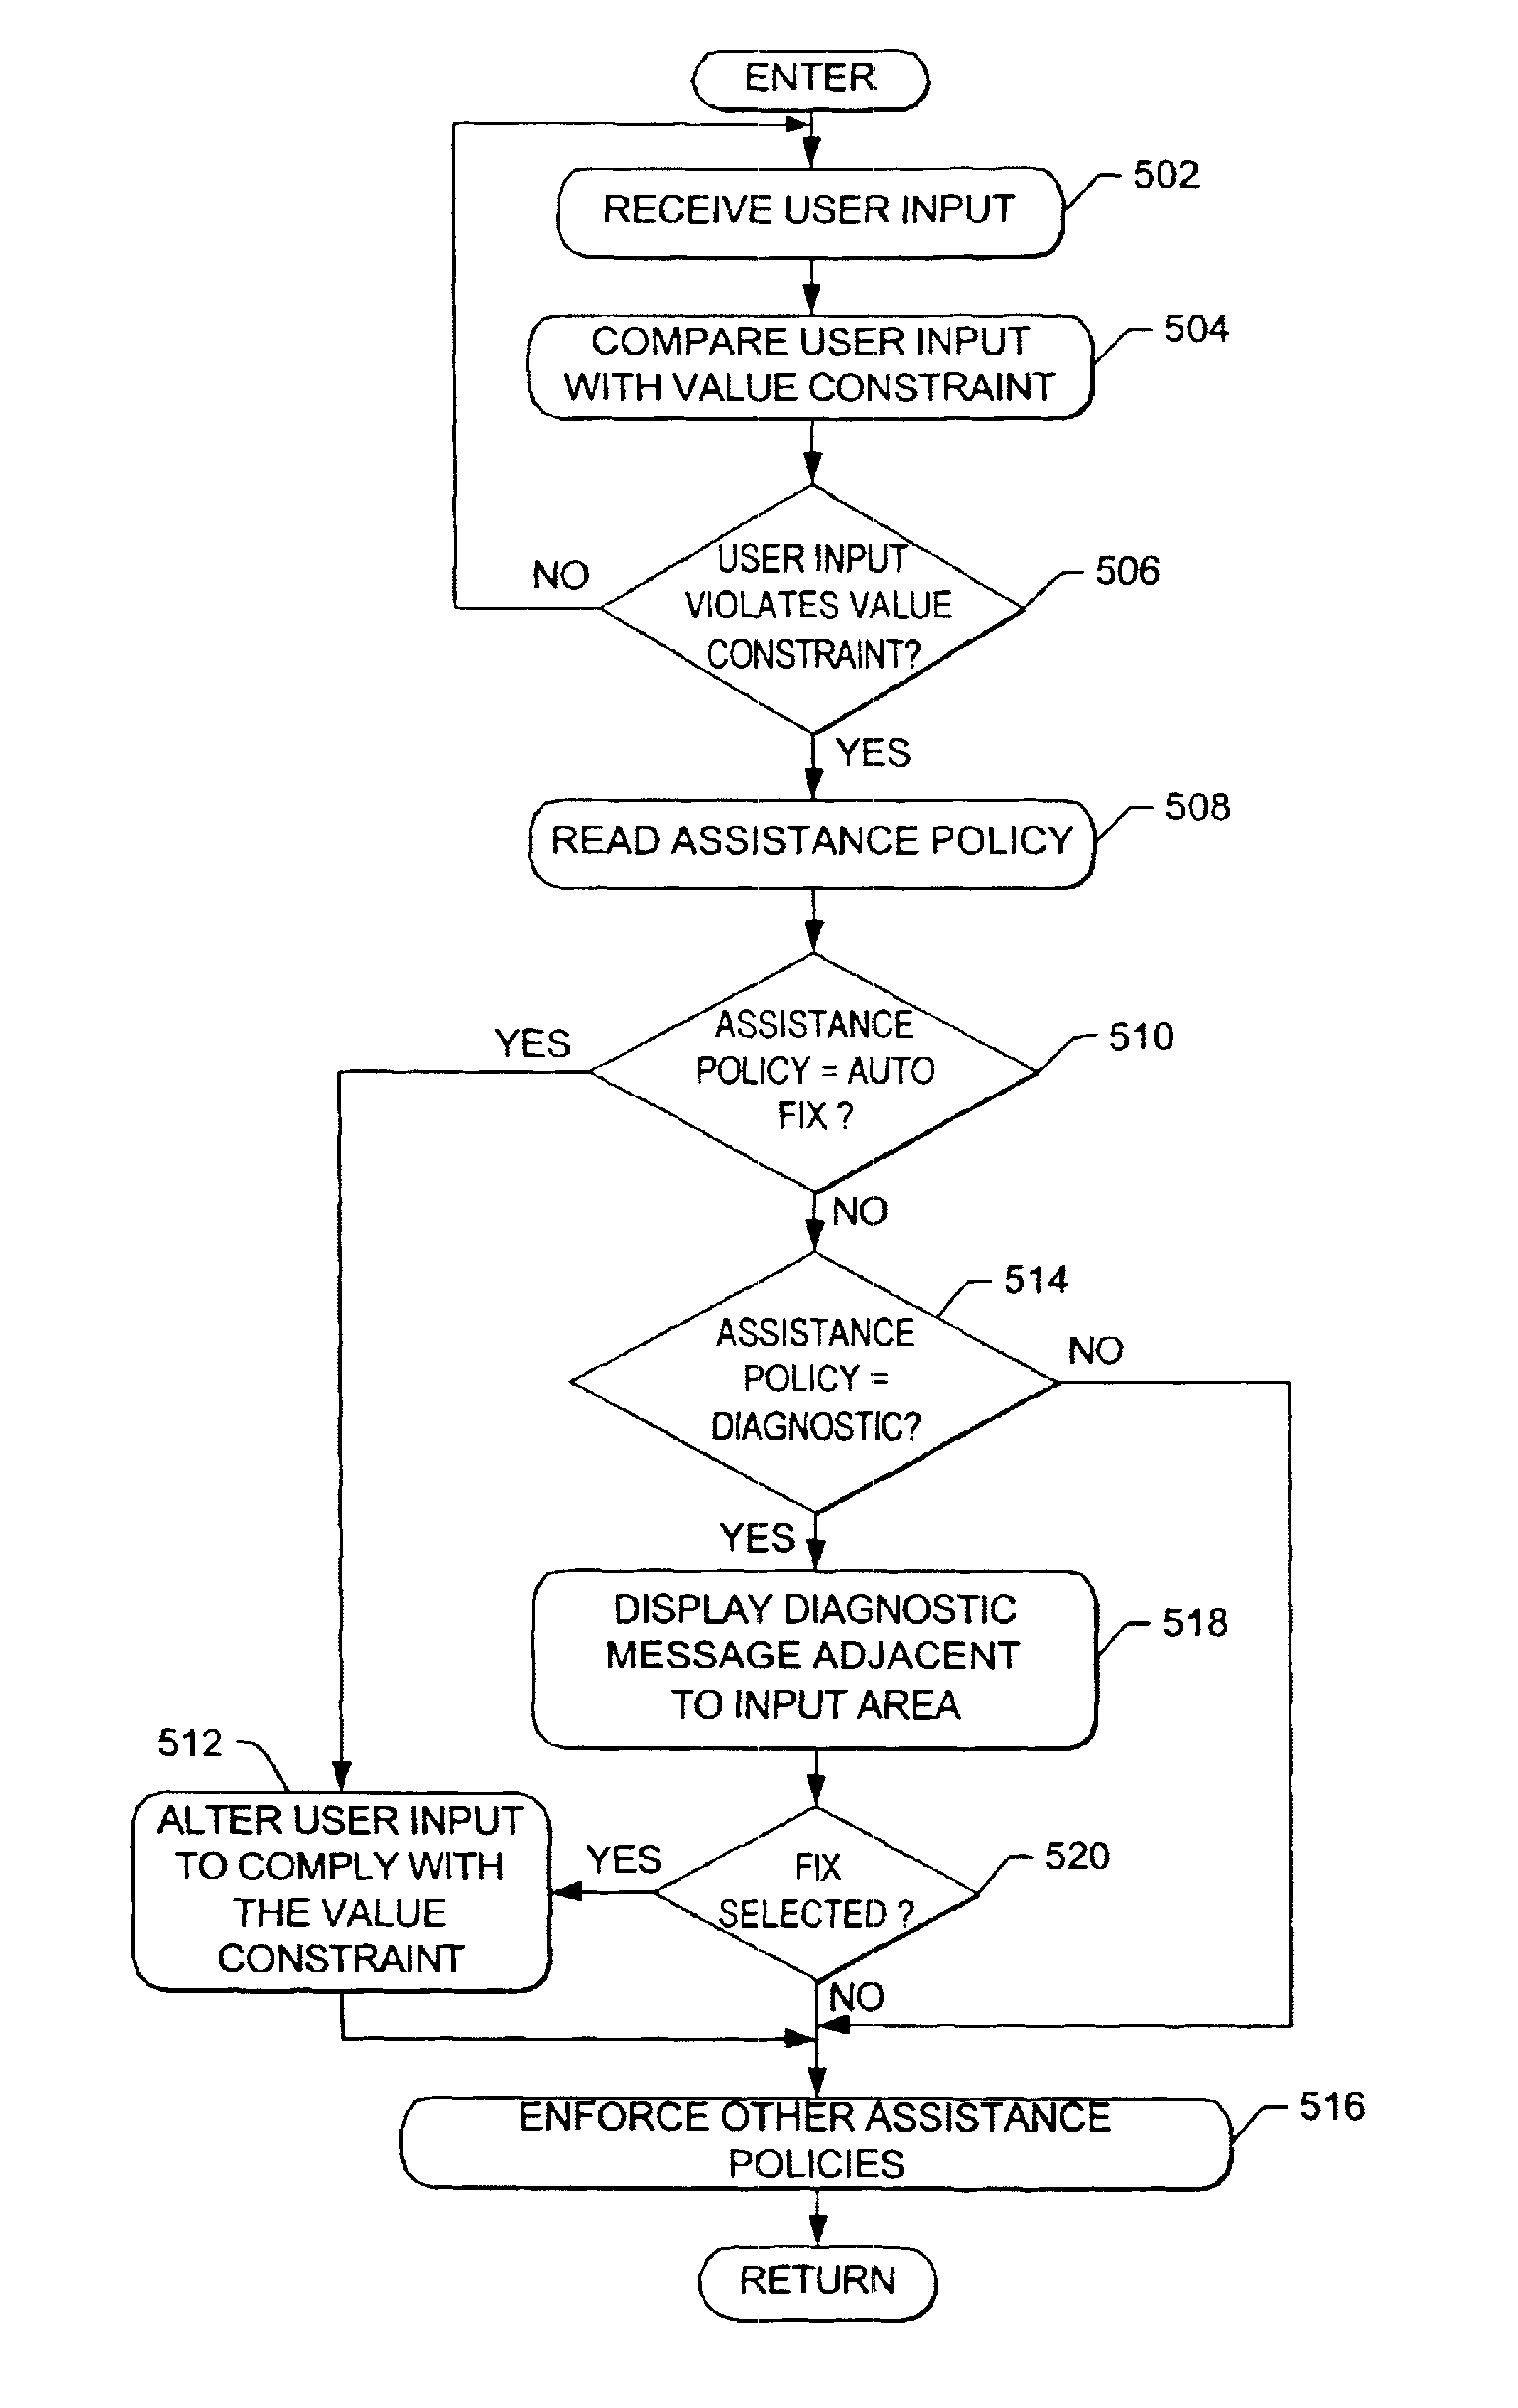 Self-diagnosing and self-correcting data entry components with dependency behavior